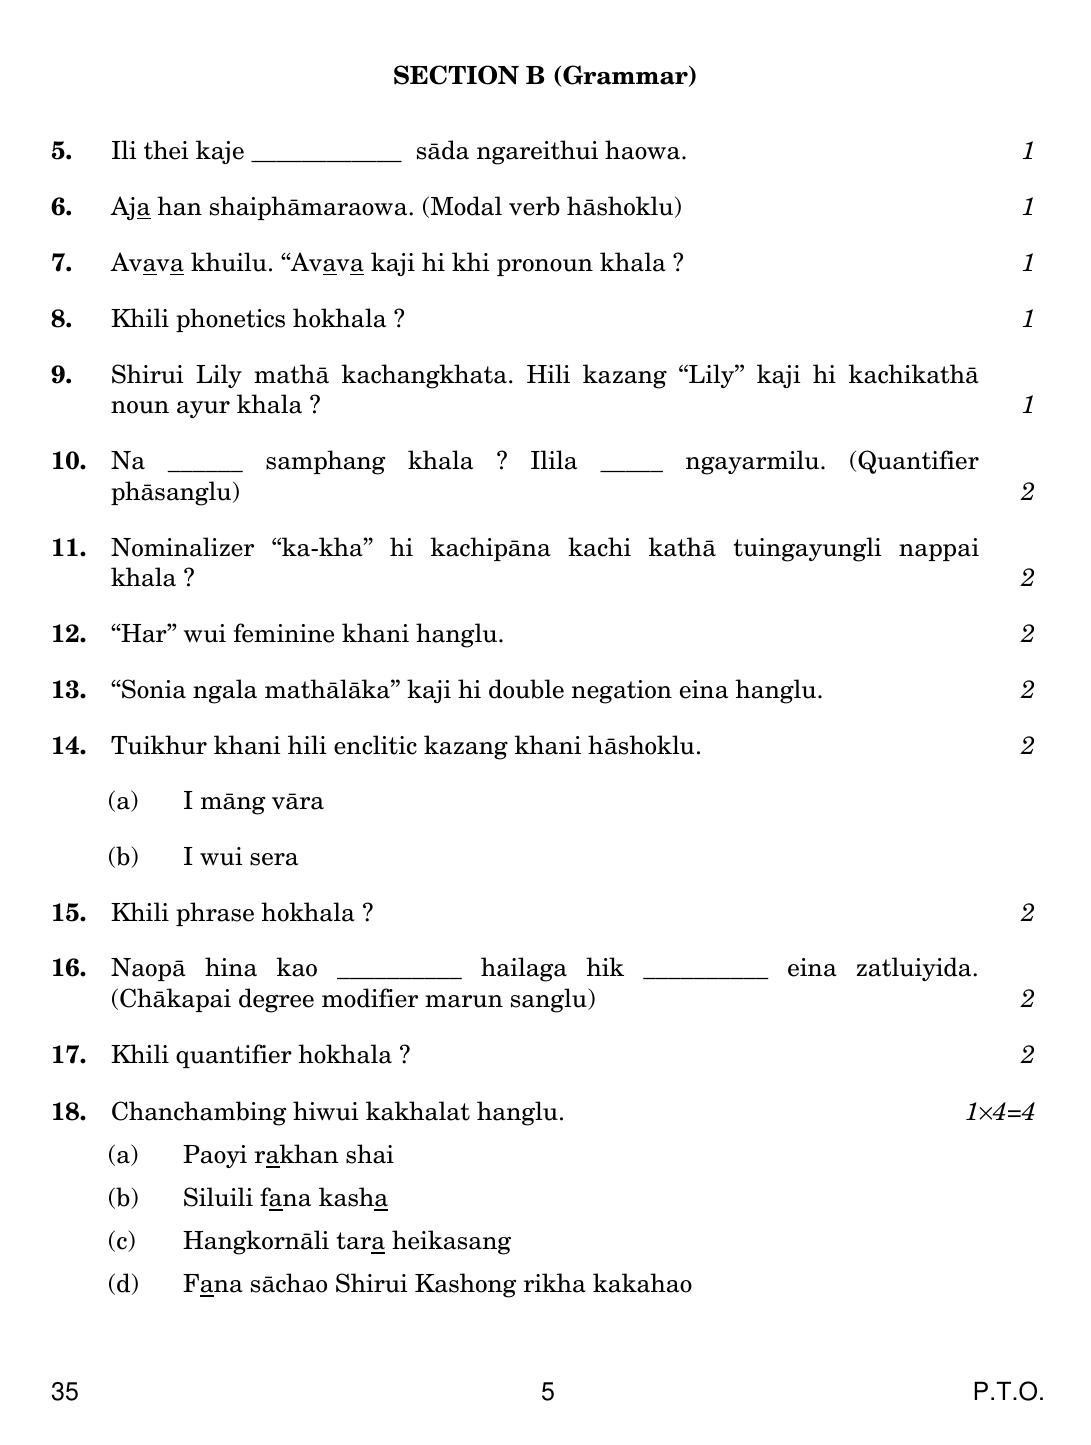 CBSE Class 12 35 TANGKHUL 2018 Question Paper - Page 5